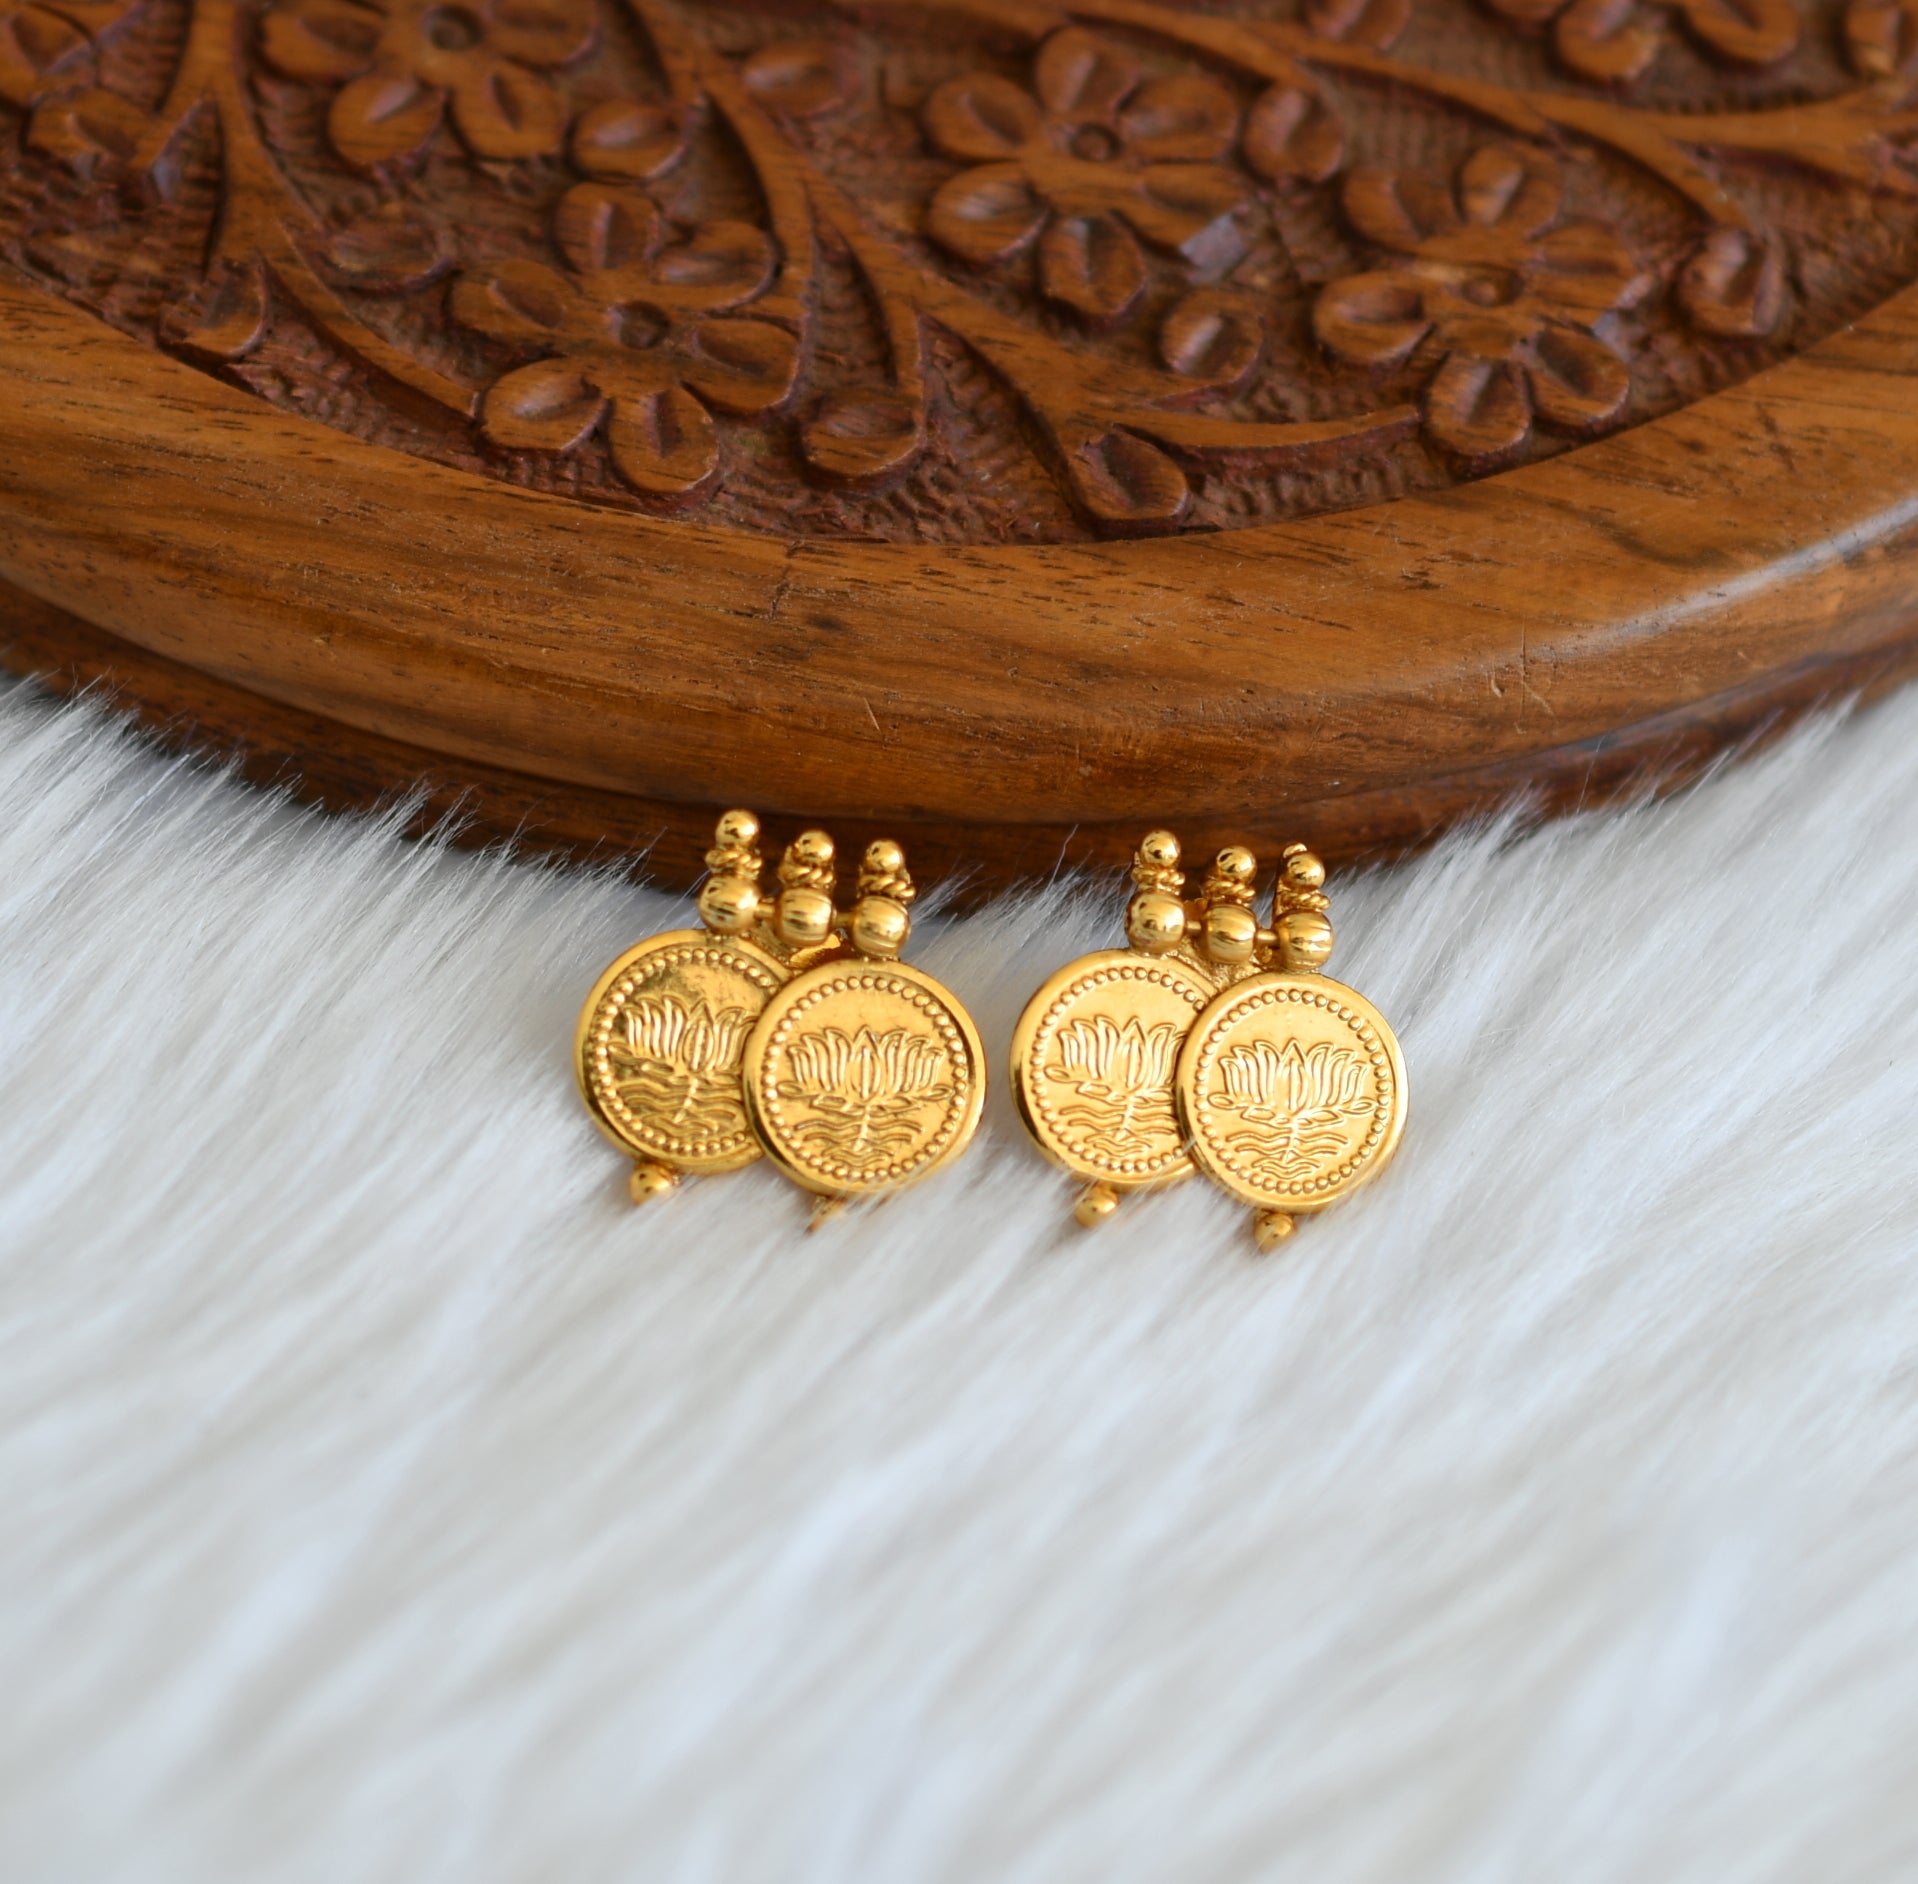 Buy Coin Earrings Antique Coin Earring Indian Coin Earrings Online in India   Etsy